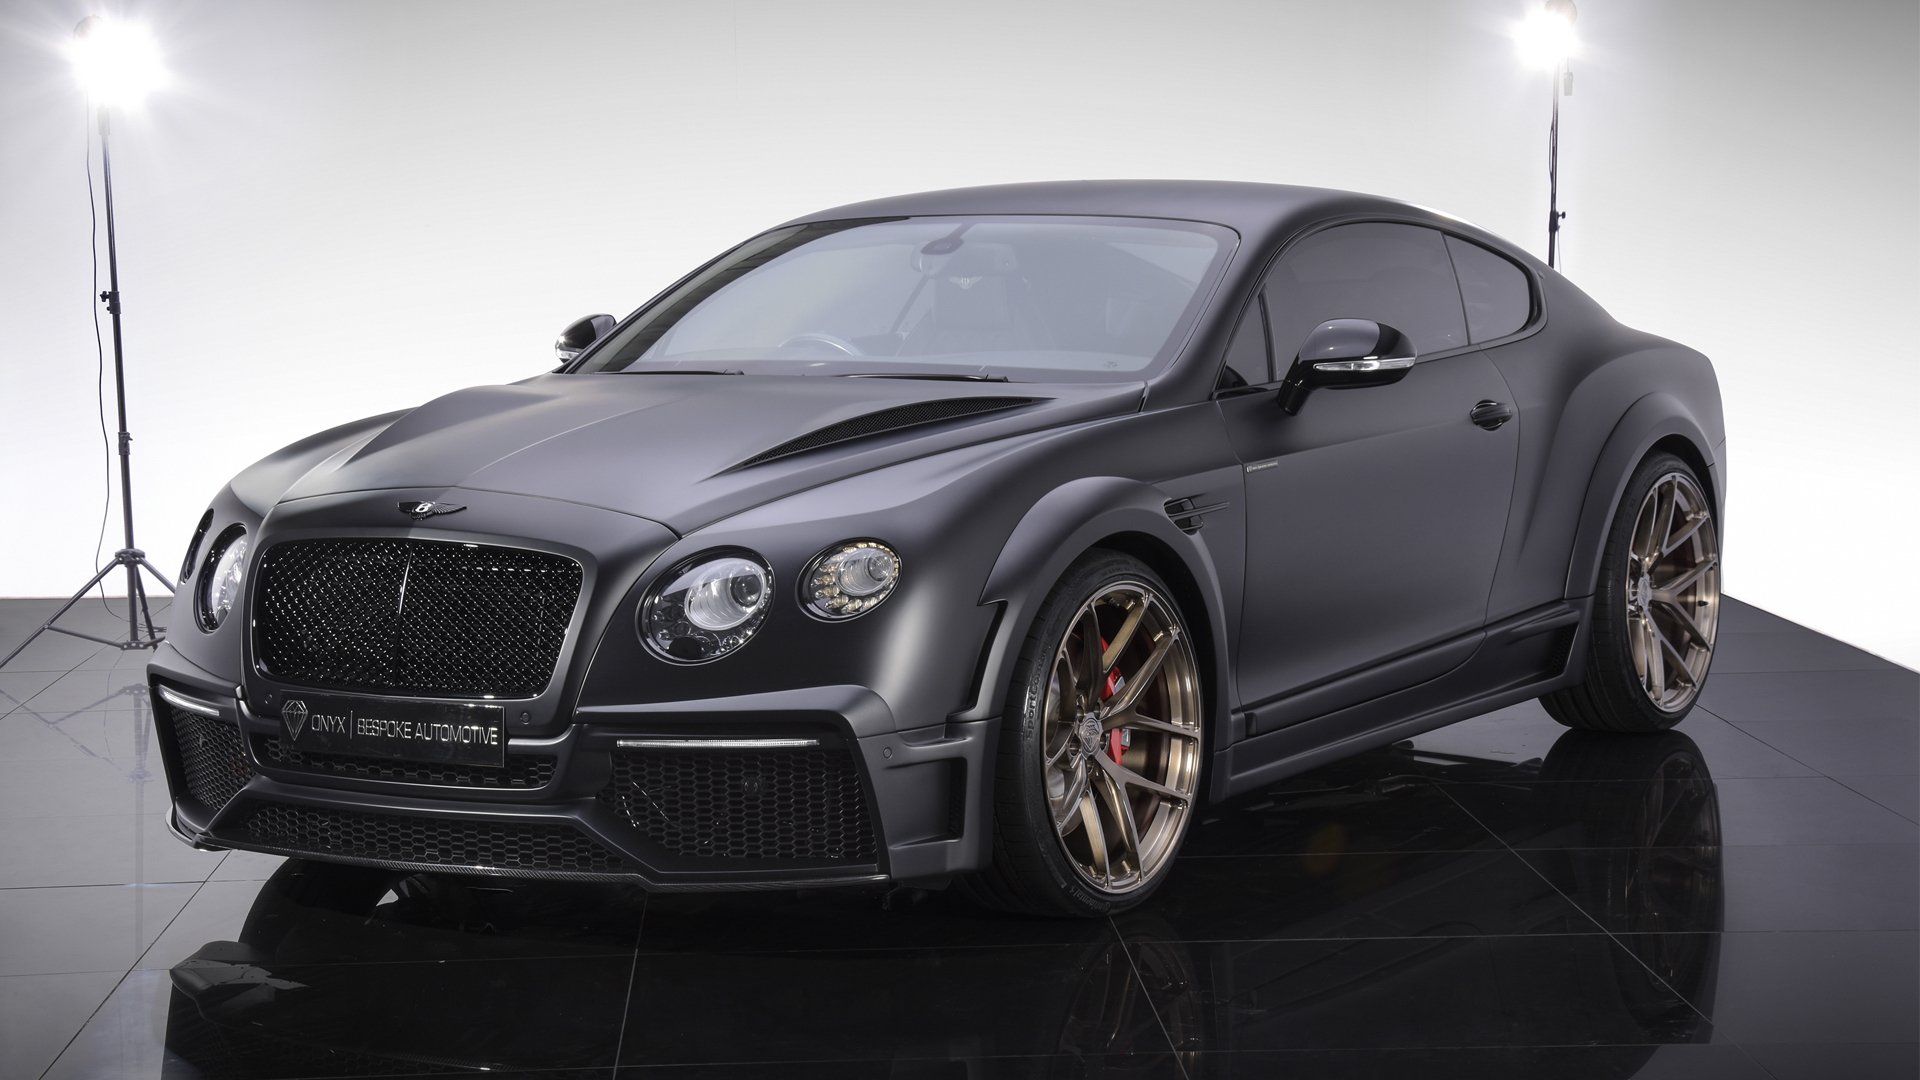 Onyx GTXII body kit for Bentley Continental GT new model